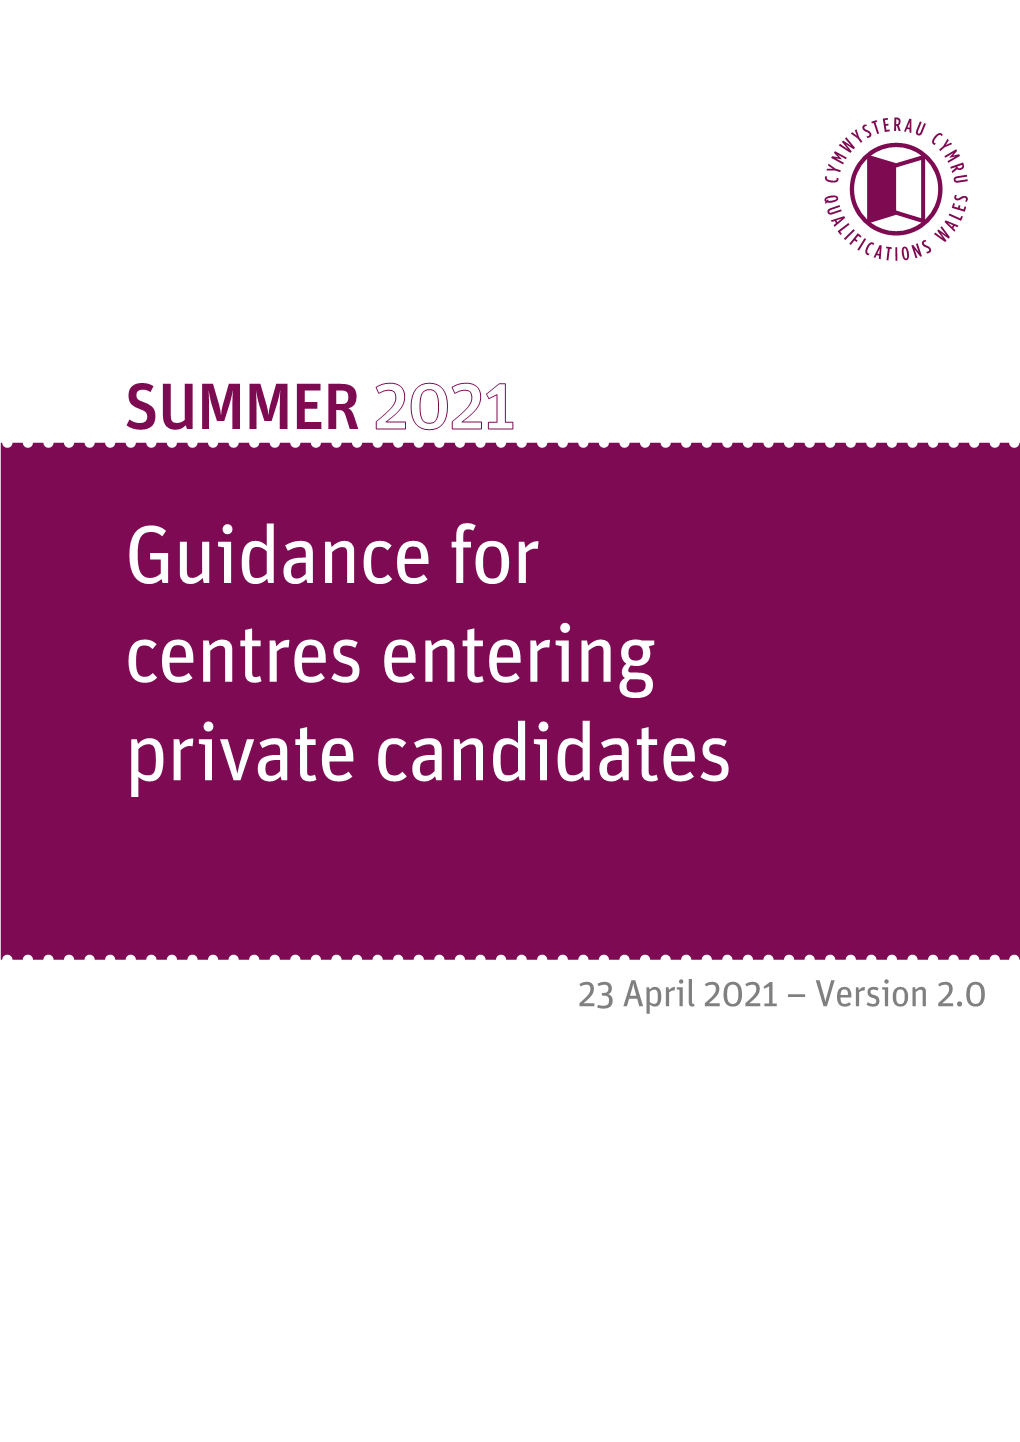 Guidance for Centres Entering Private Candidates